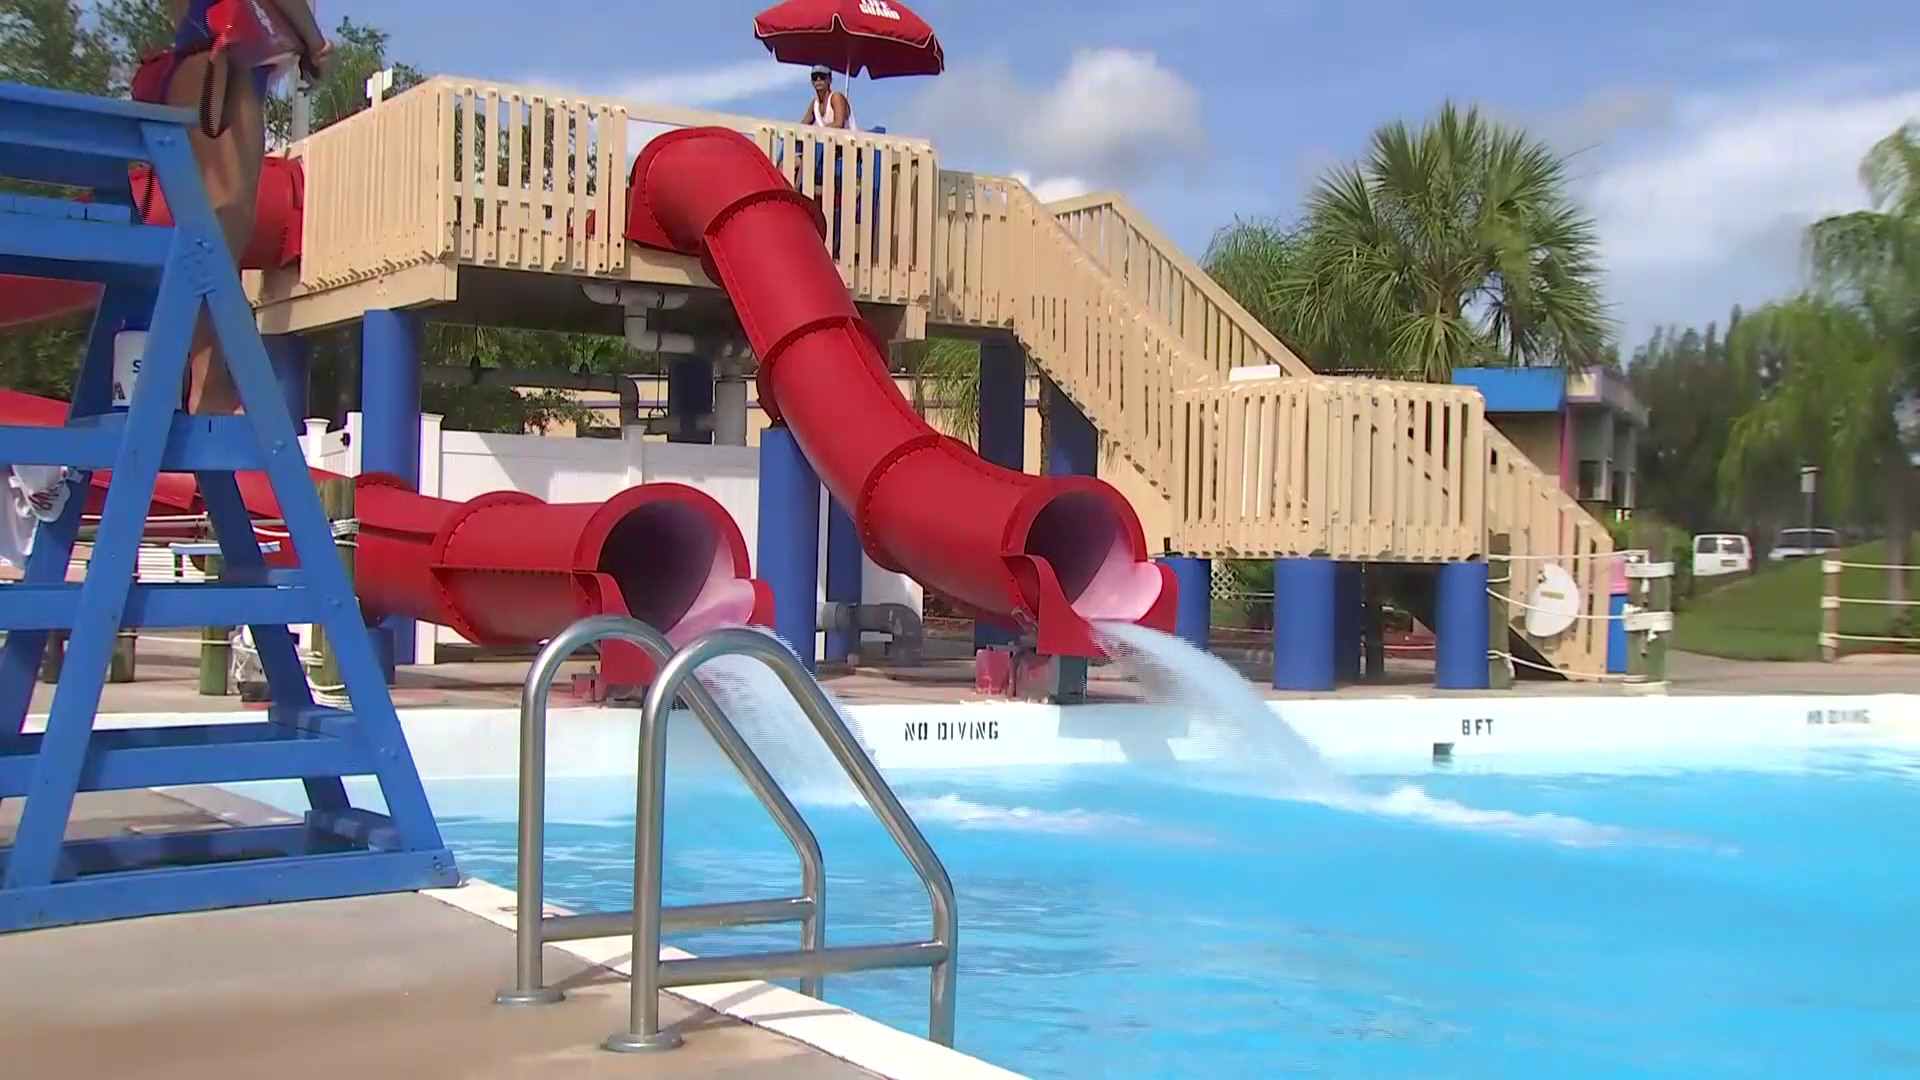 Sun Splash Water Park prepares to reopen, will operate at 50% capacity